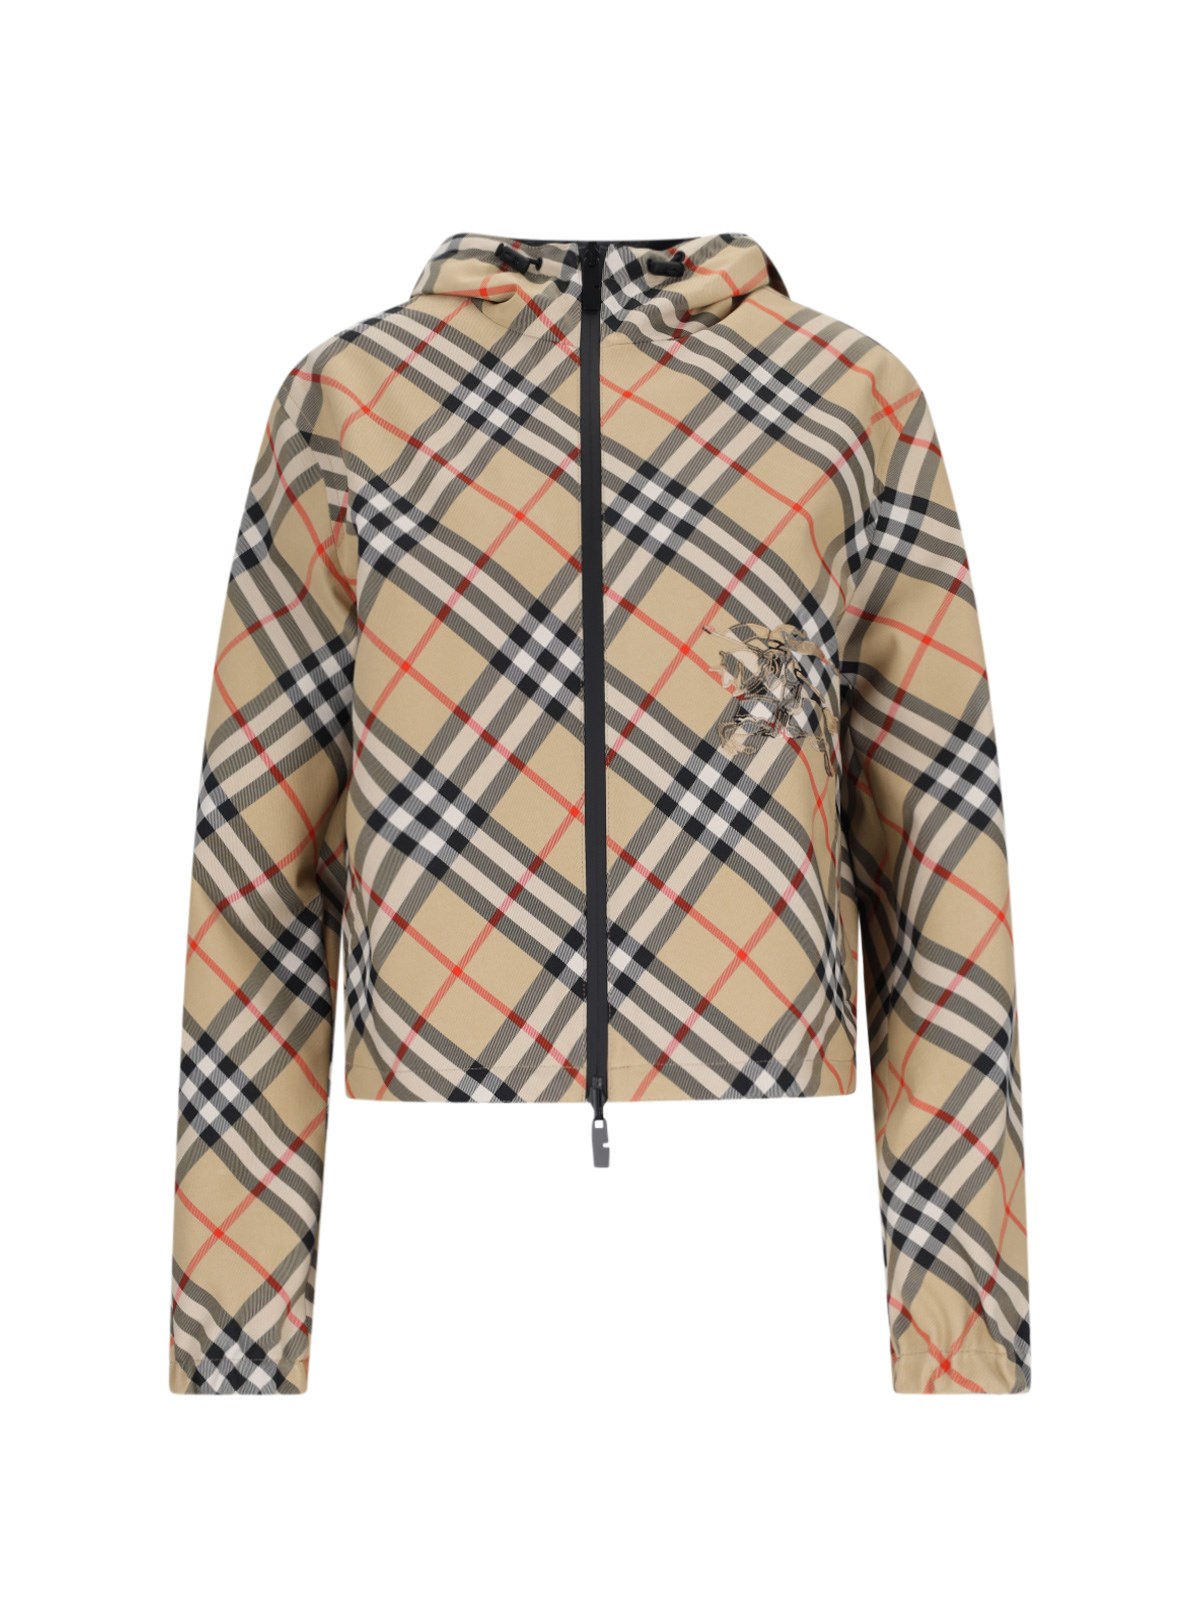 Burberry 'check' Reversible Cropped Jacket In Beige